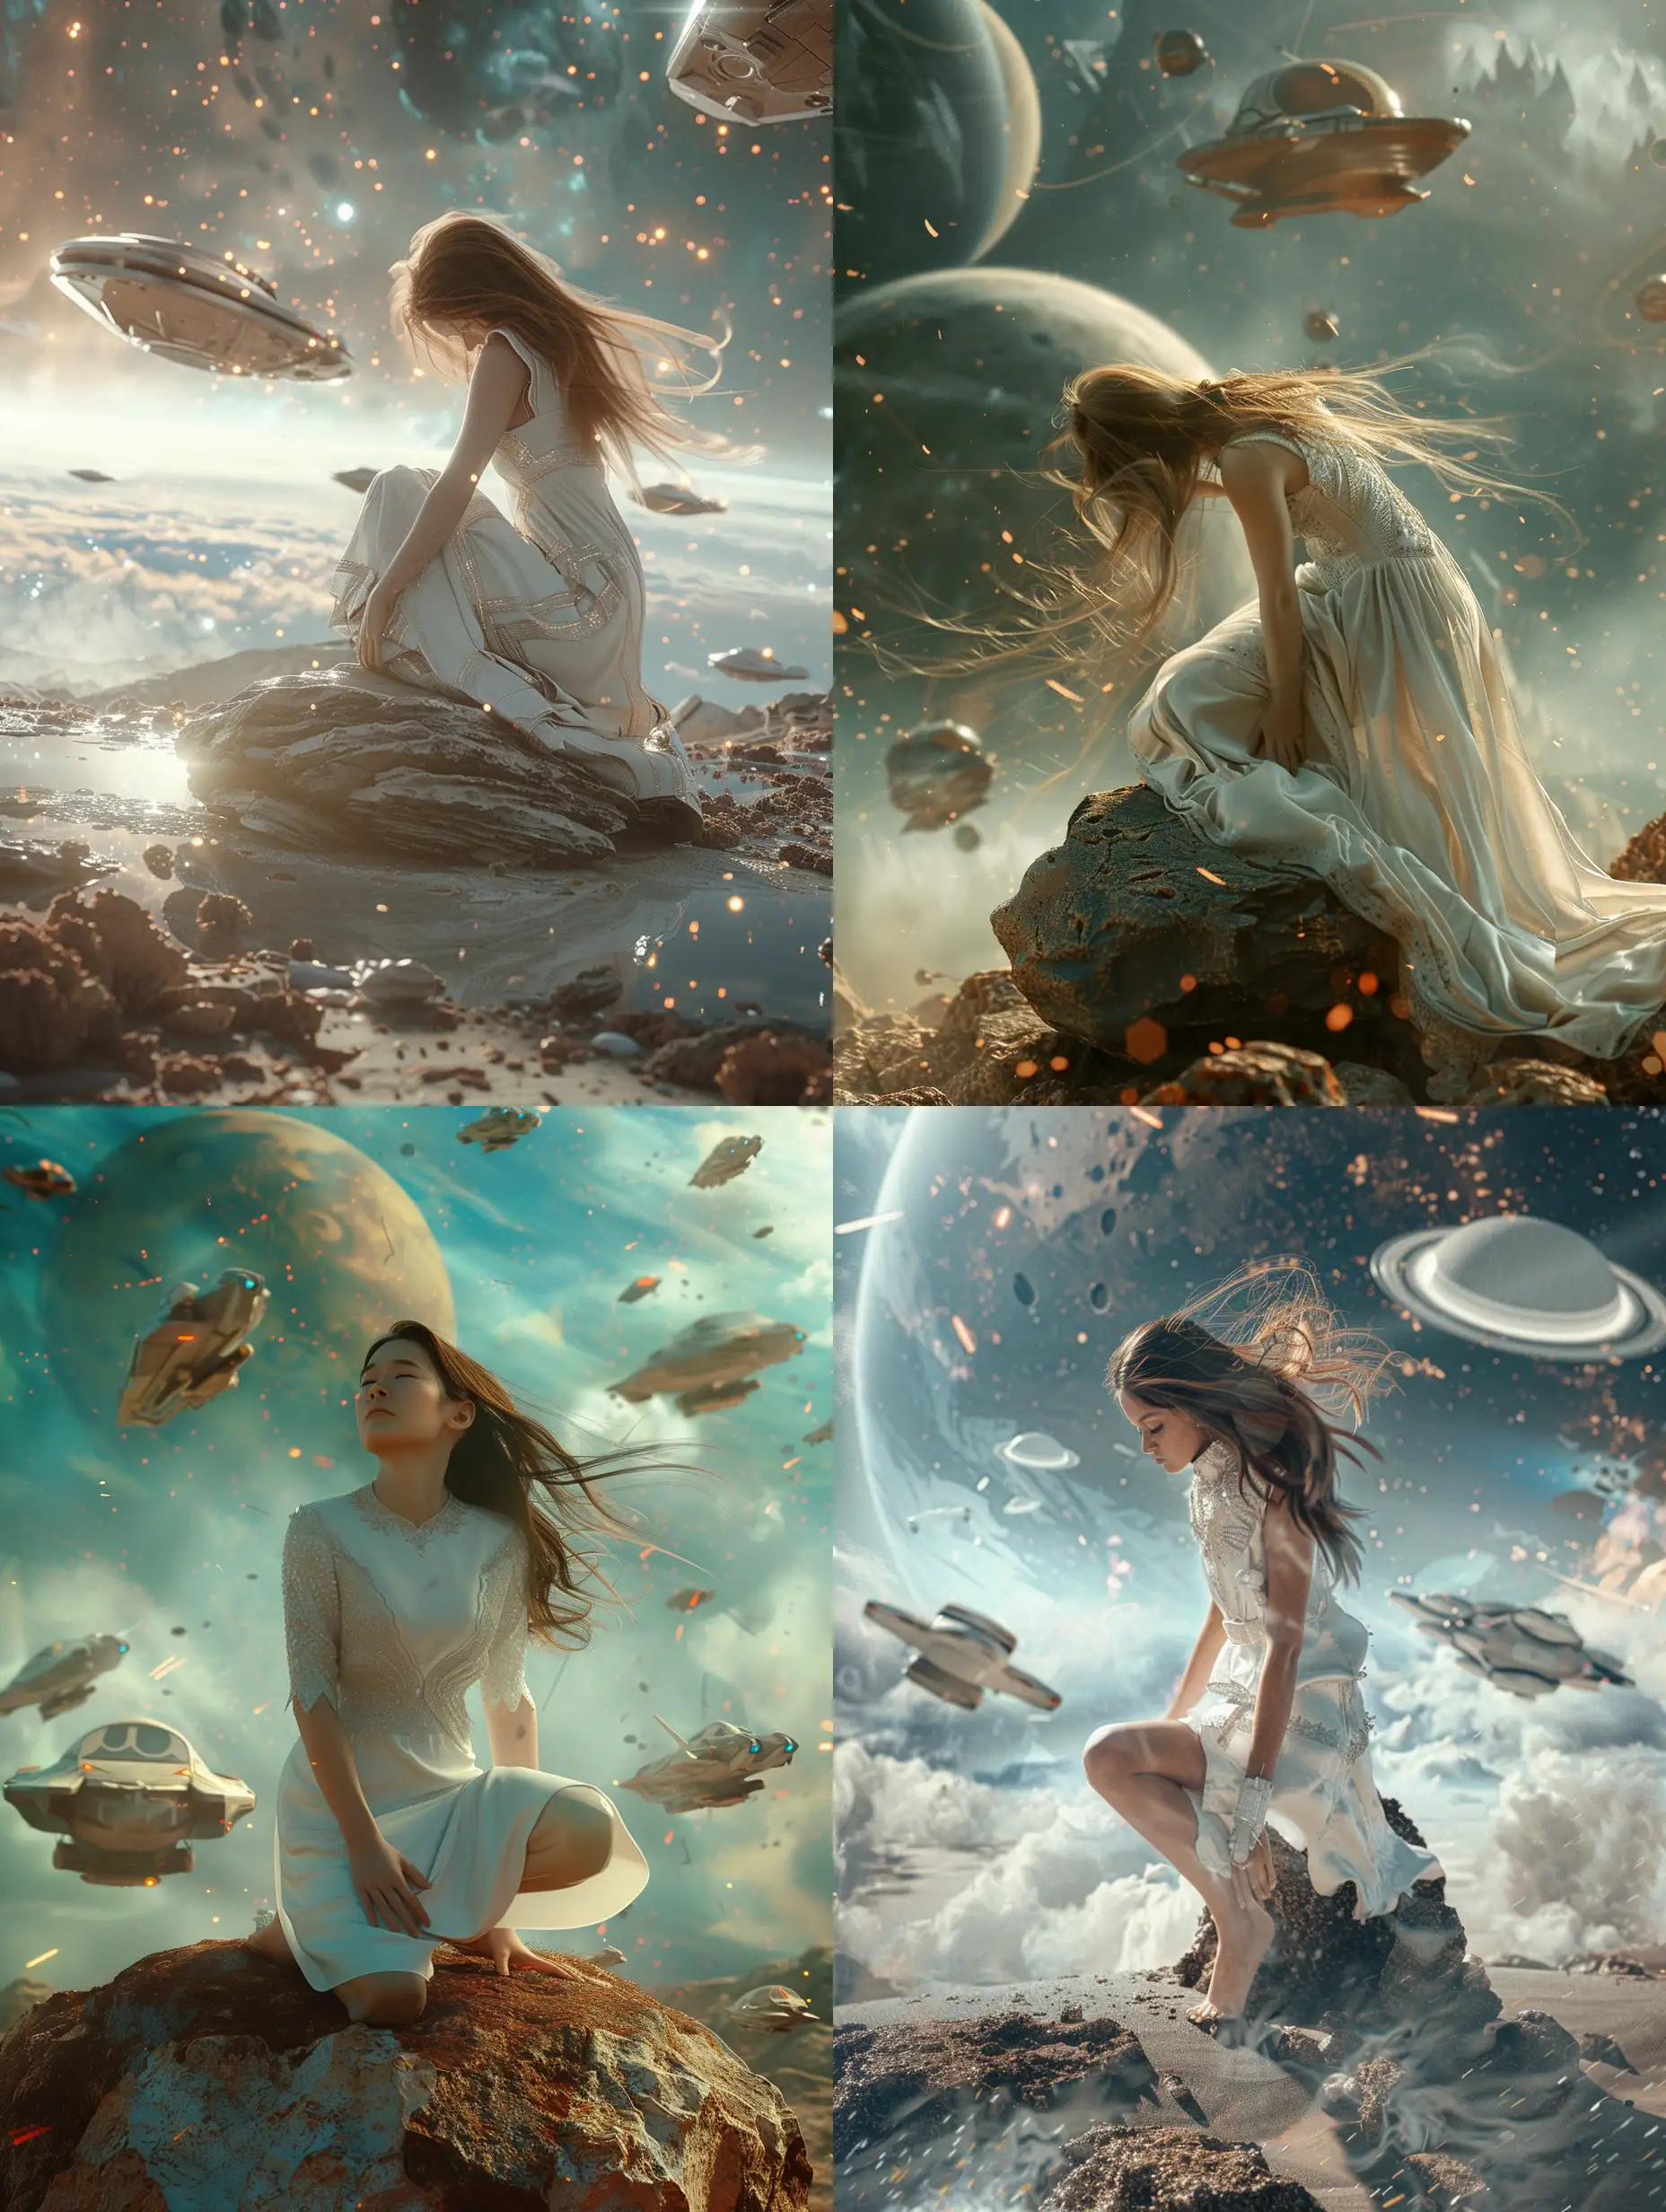 Enchanting-Space-Odyssey-Girl-in-White-Space-Dress-on-a-Surreal-Planet